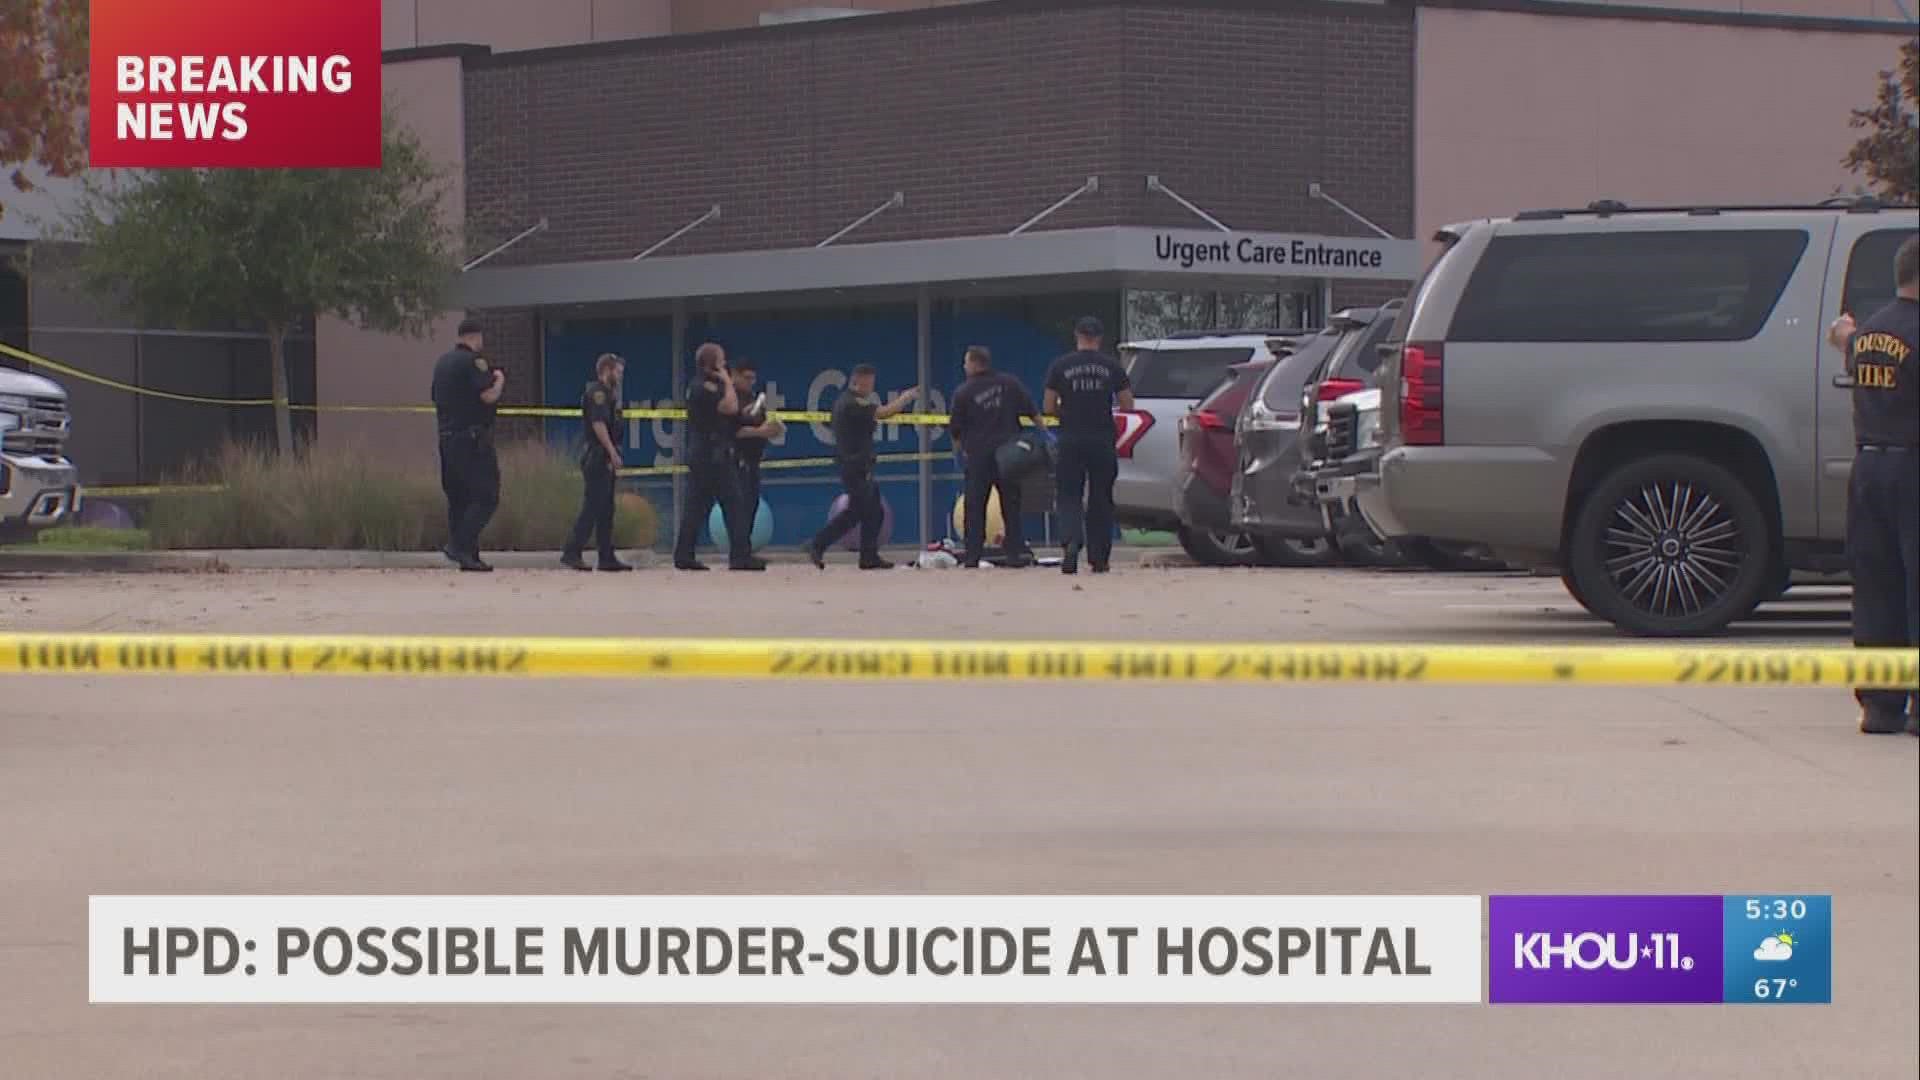 Police appeared to rope off a section of the hospital's parking lot while officers processed the scene.